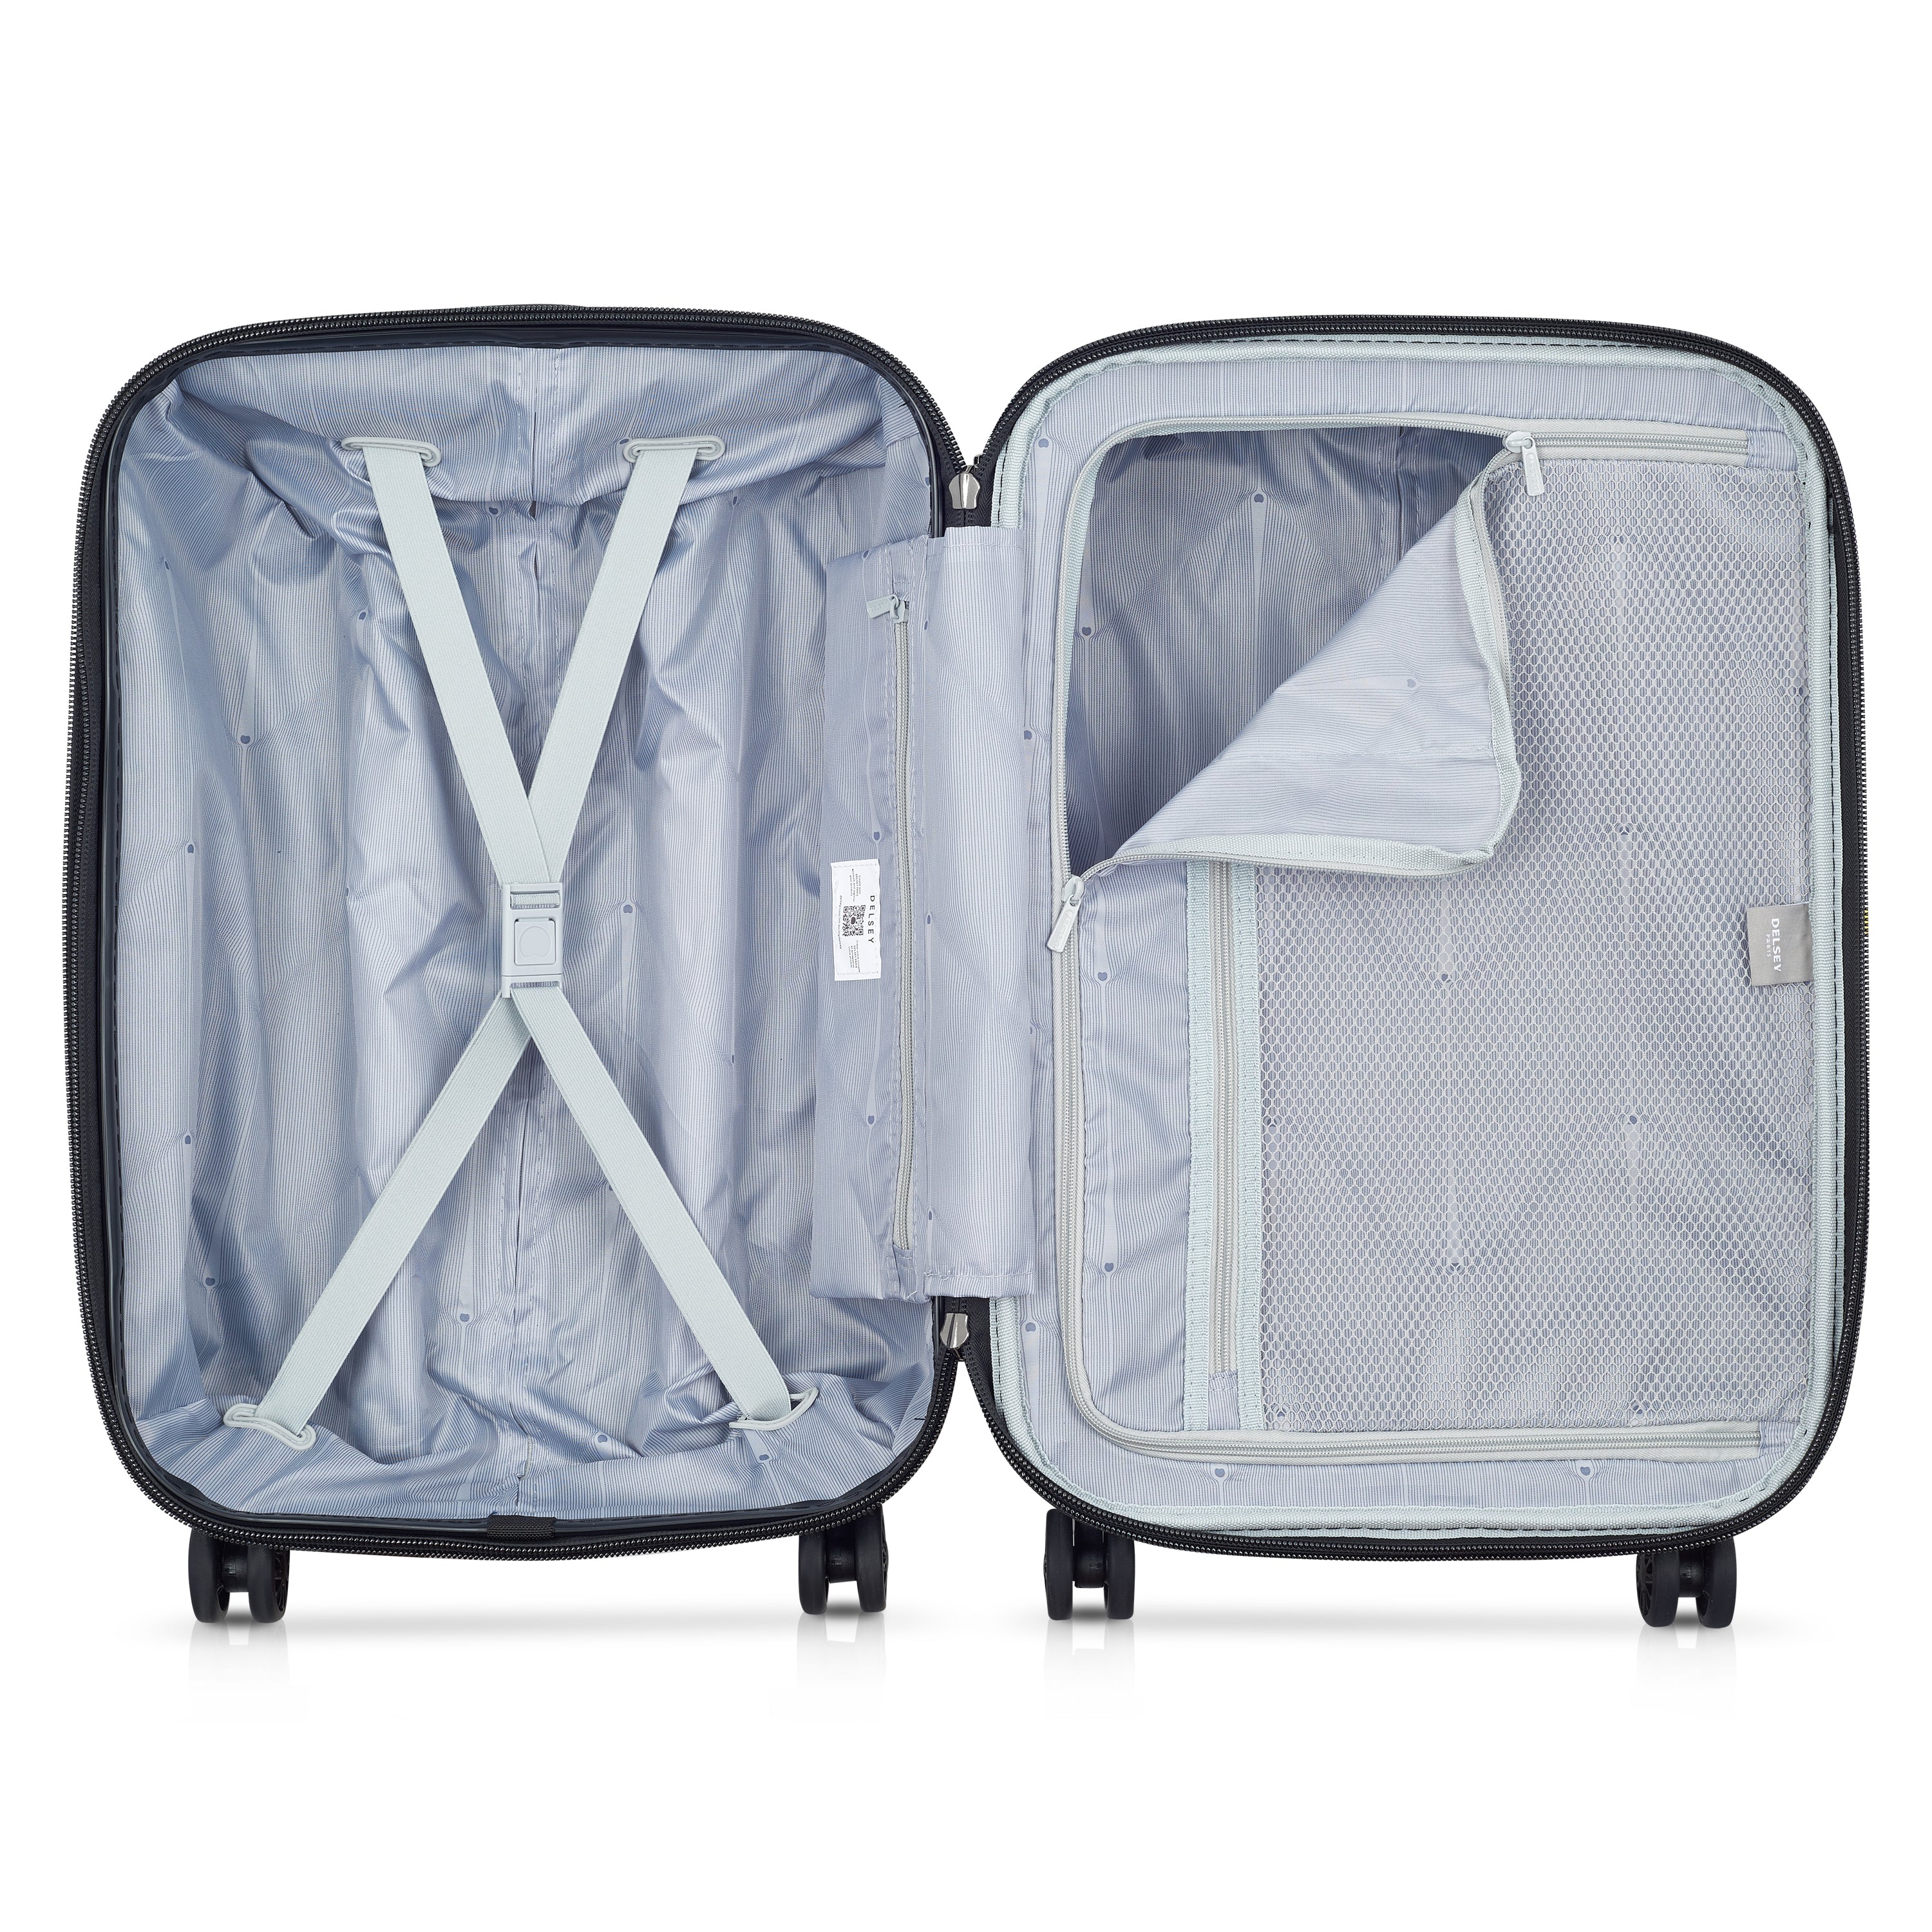 Delsey Depart Hard 61cm Hardcase Expandable 4 Double Wheel Cabin Luggage Trolley Case Navy Blue - 00314580522 X9